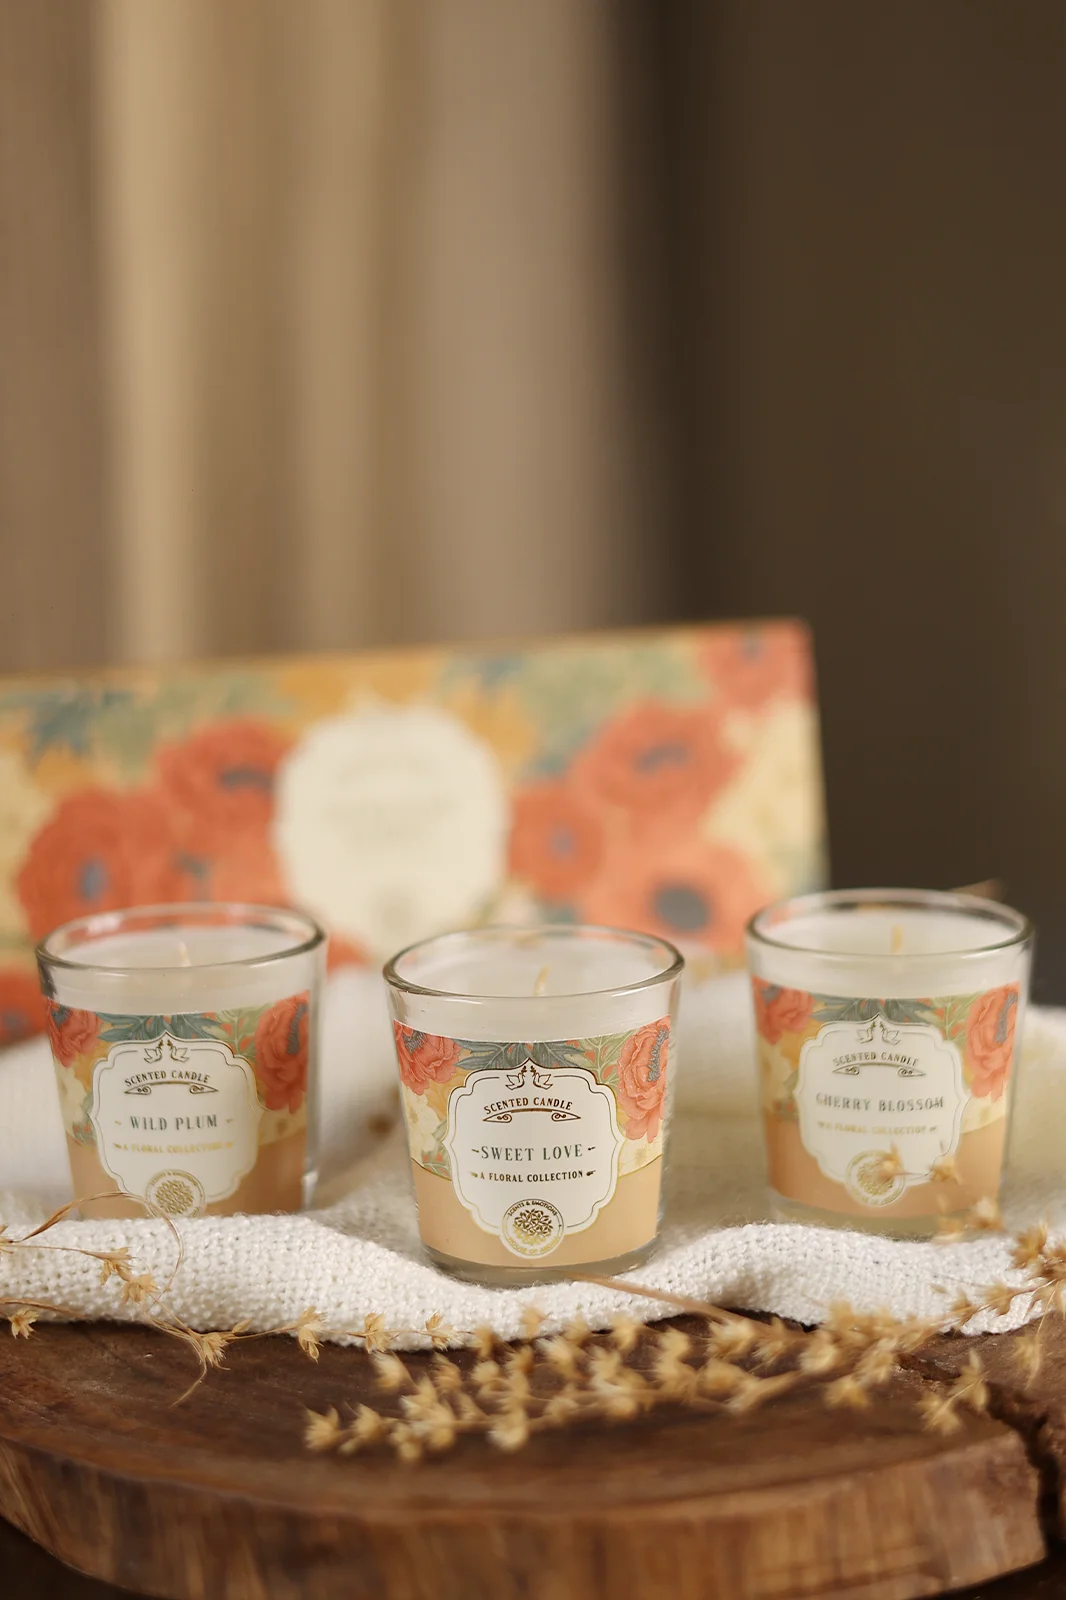 Enchanted garden scented candle gift set, Scented candles gift set, Gift set, Candle for gifting, Candle gift set, gift scented candles, decor candles, garden scented candle, aroma candles, candle gift, enchanted garden, soy wax candle gift set, wax candles, house of aroma